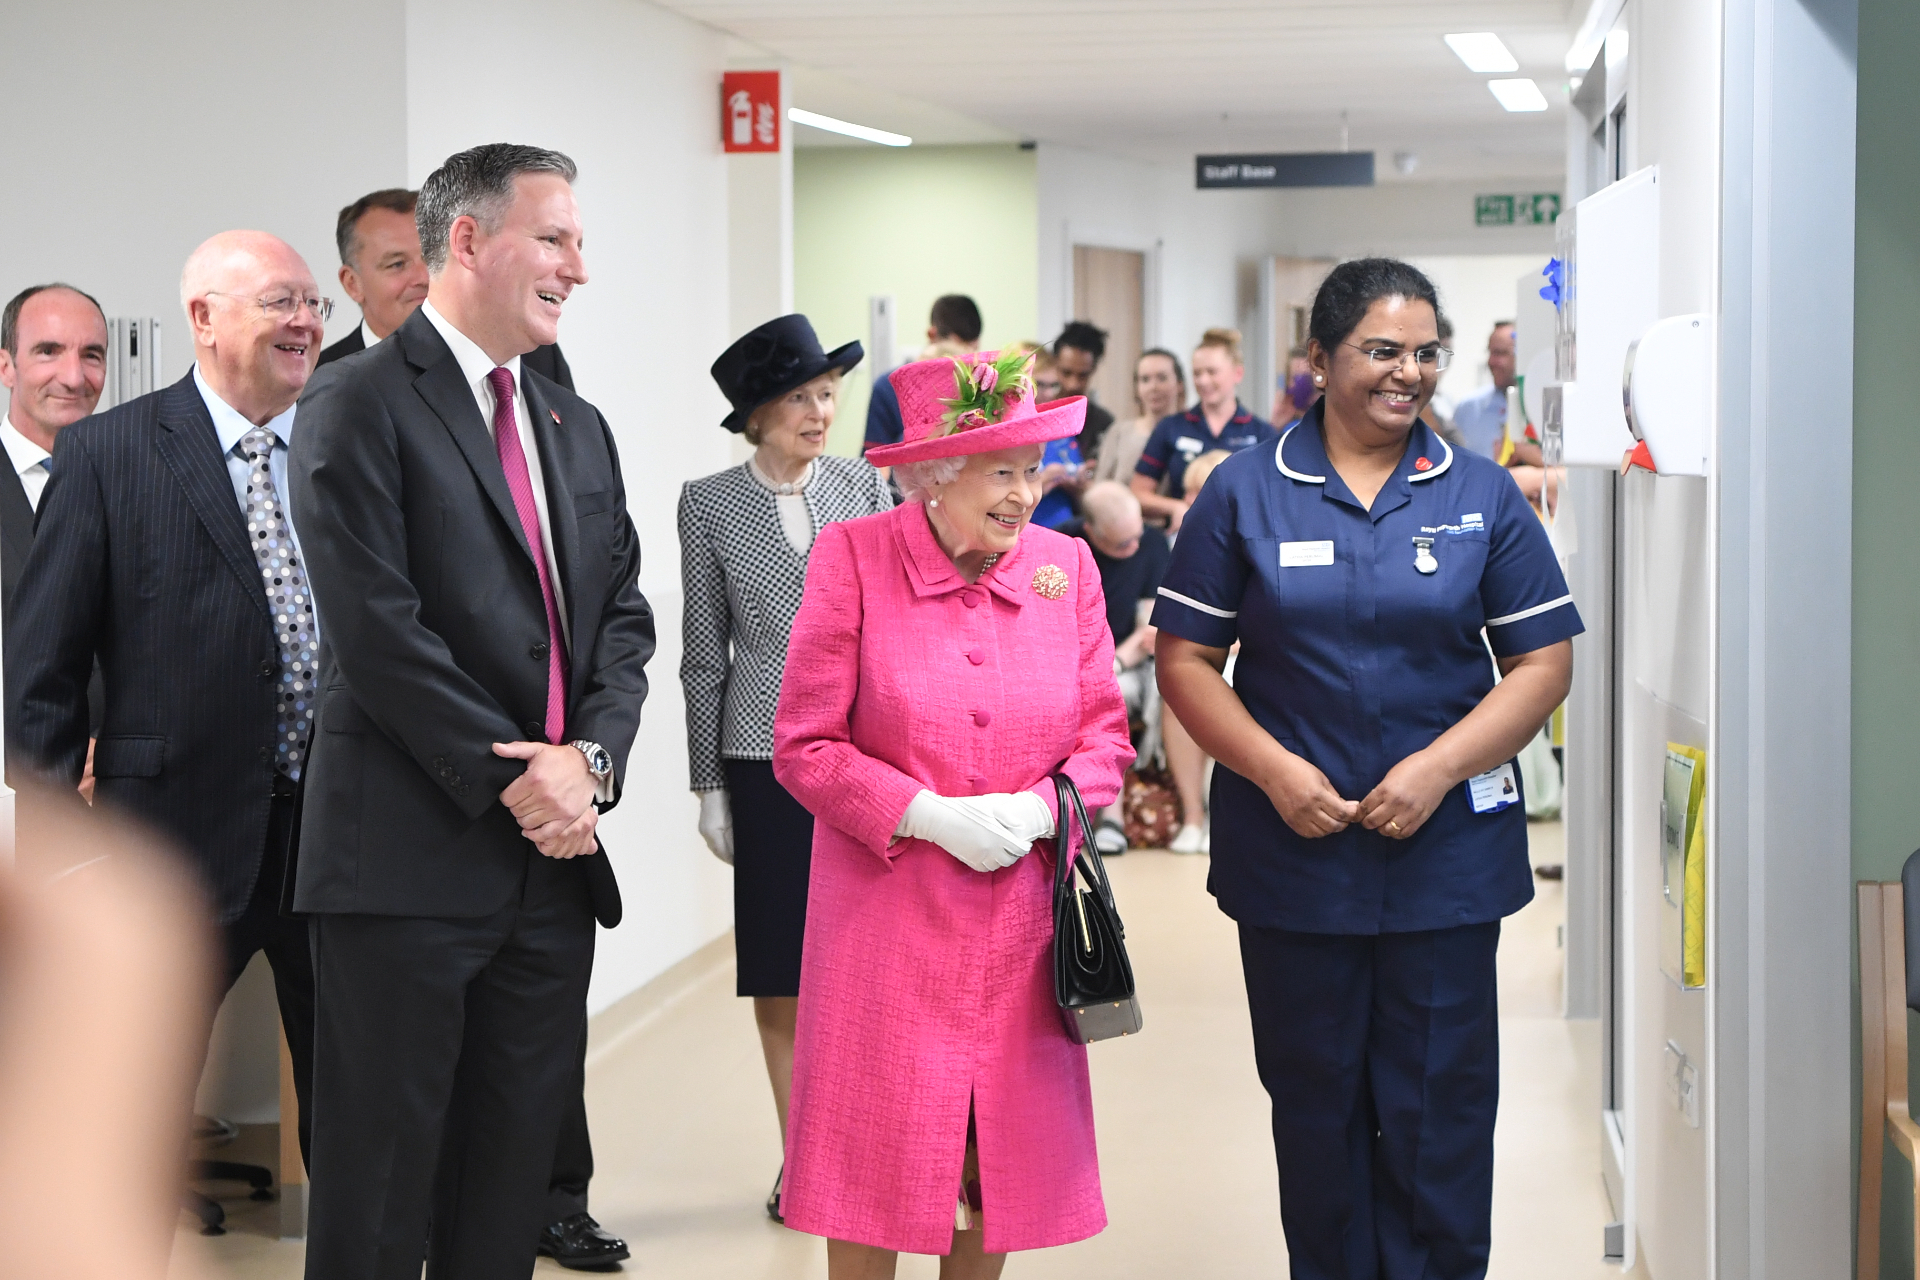 HM the Queen official opening - July 2019.jpg